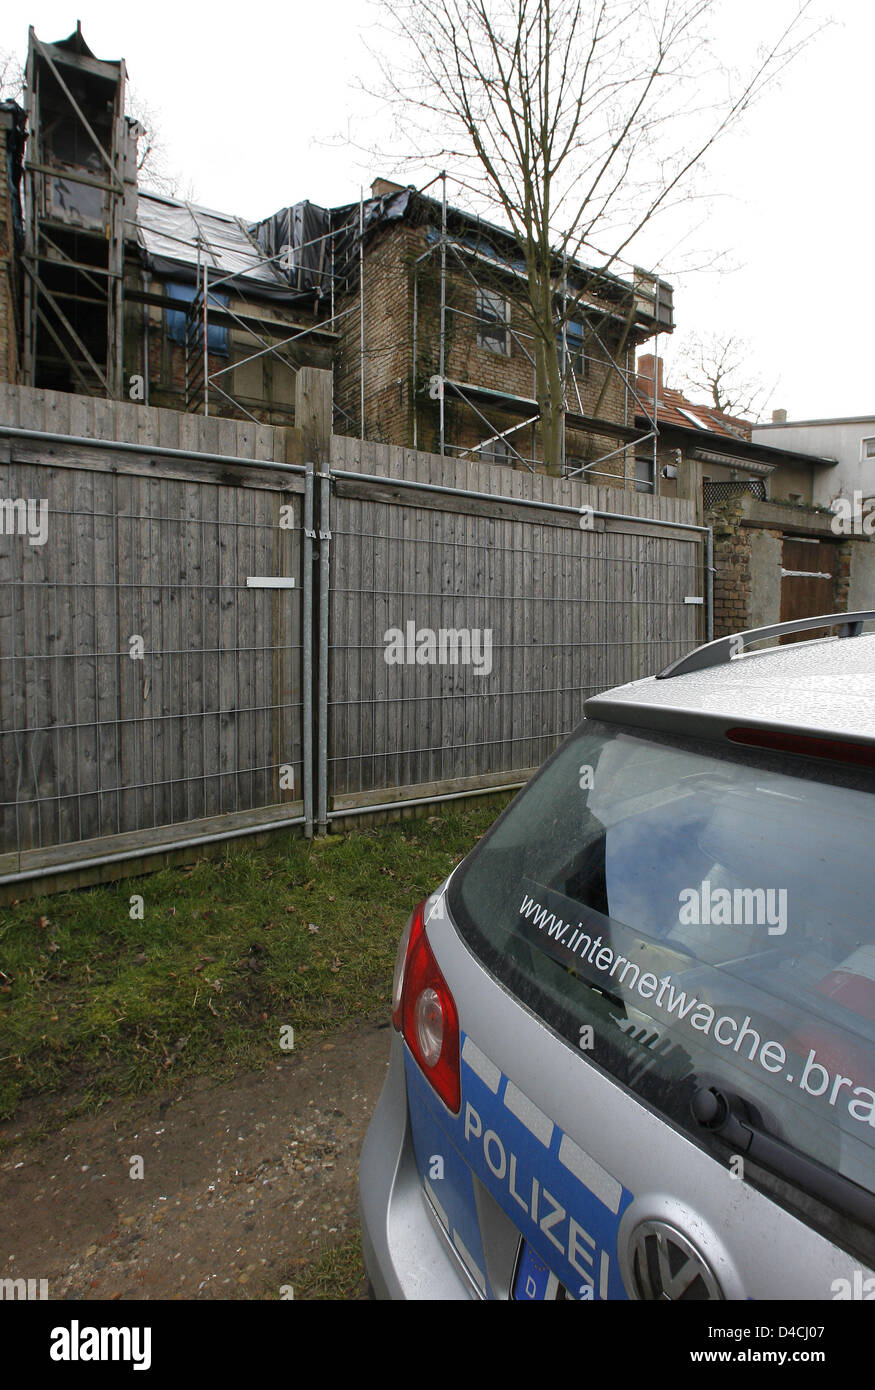 A police car parks in front of a  house parcially covered by a scaffolding in the Mauer street in Nauen, Germany, 06 February 2008. The house is the discovery site of a dead baby, who was found in a plastic bag in an open cellar by the house's owner on an inspection tour. After the discovery the police searches for the mother of the dead infant. An autopsy was ordered for the 06 Fe Stock Photo